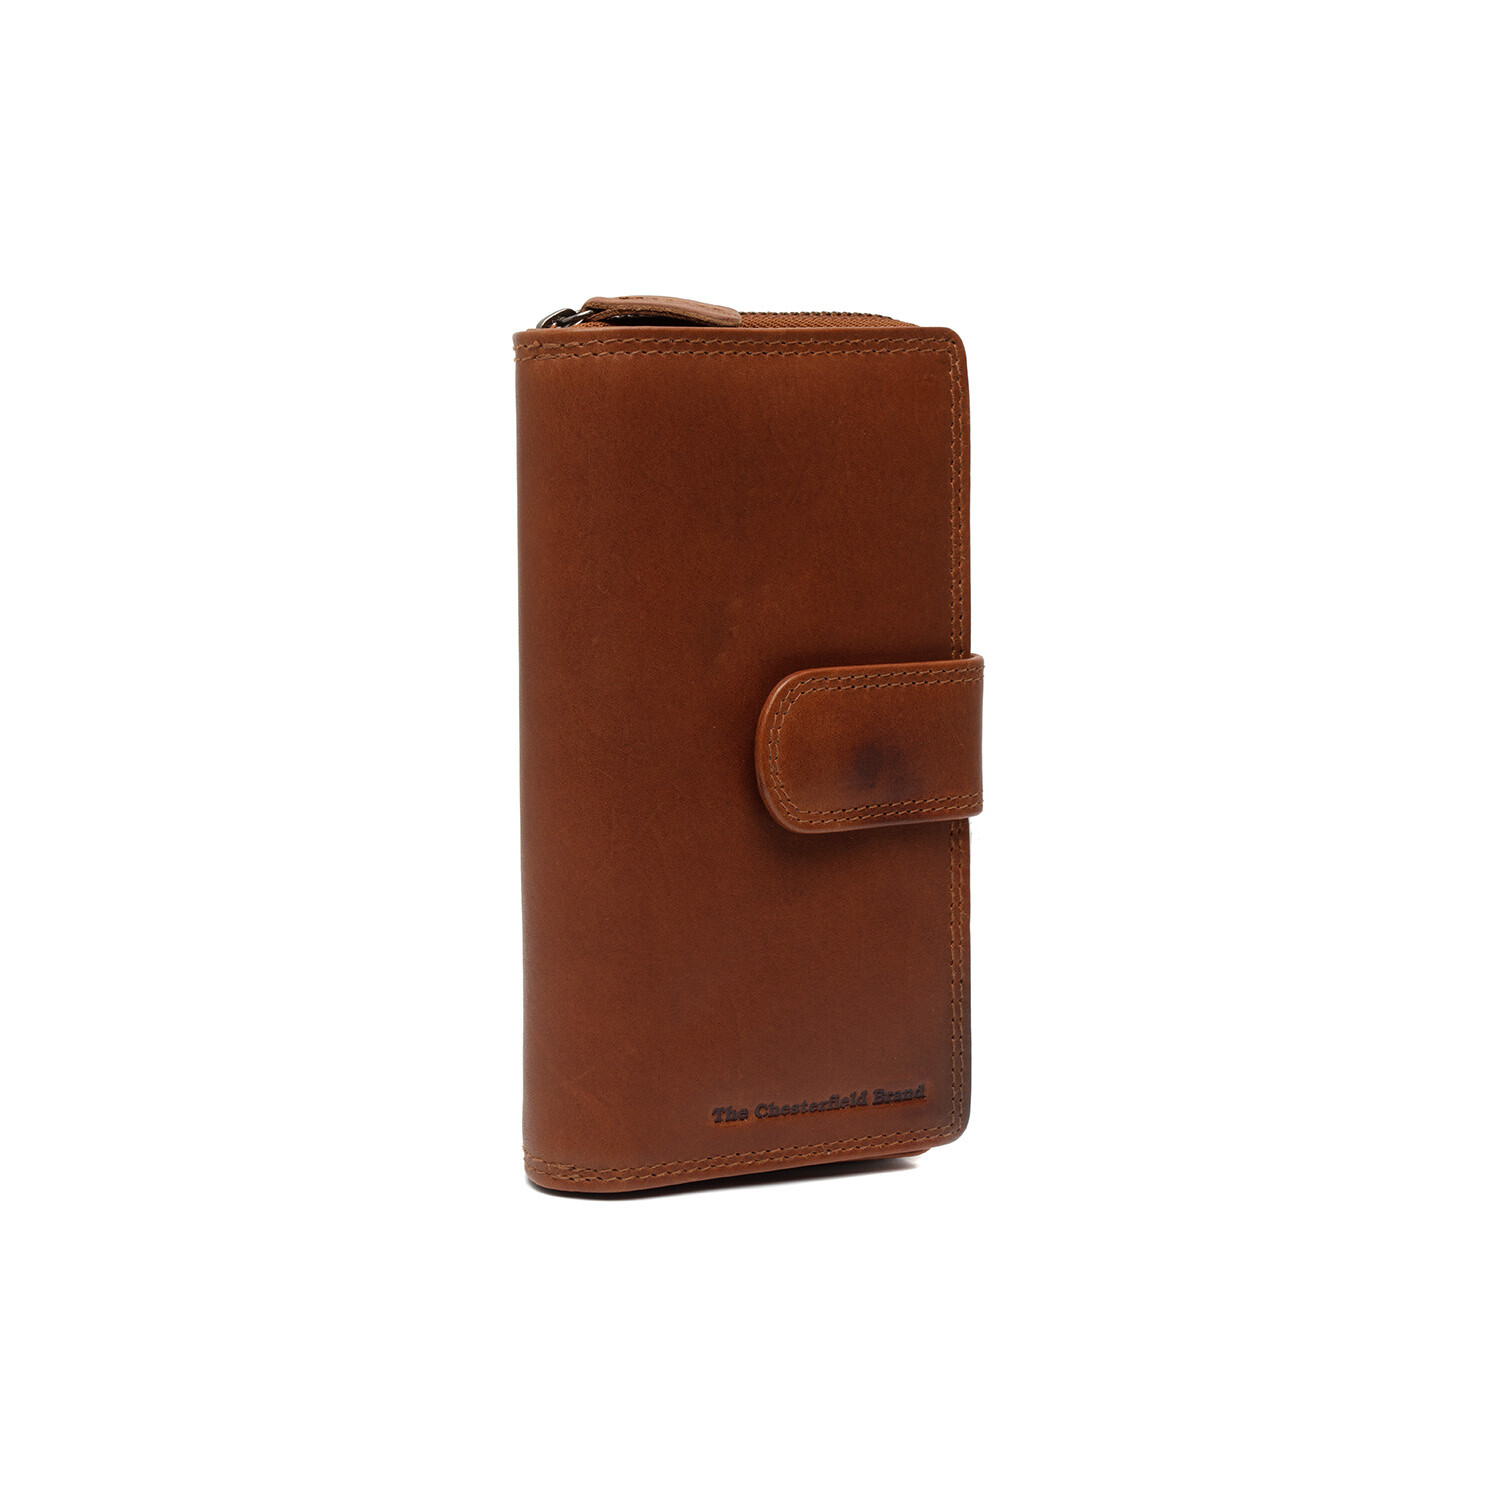 Leather Wallet Cognac Charlotte - The Chesterfield Brand